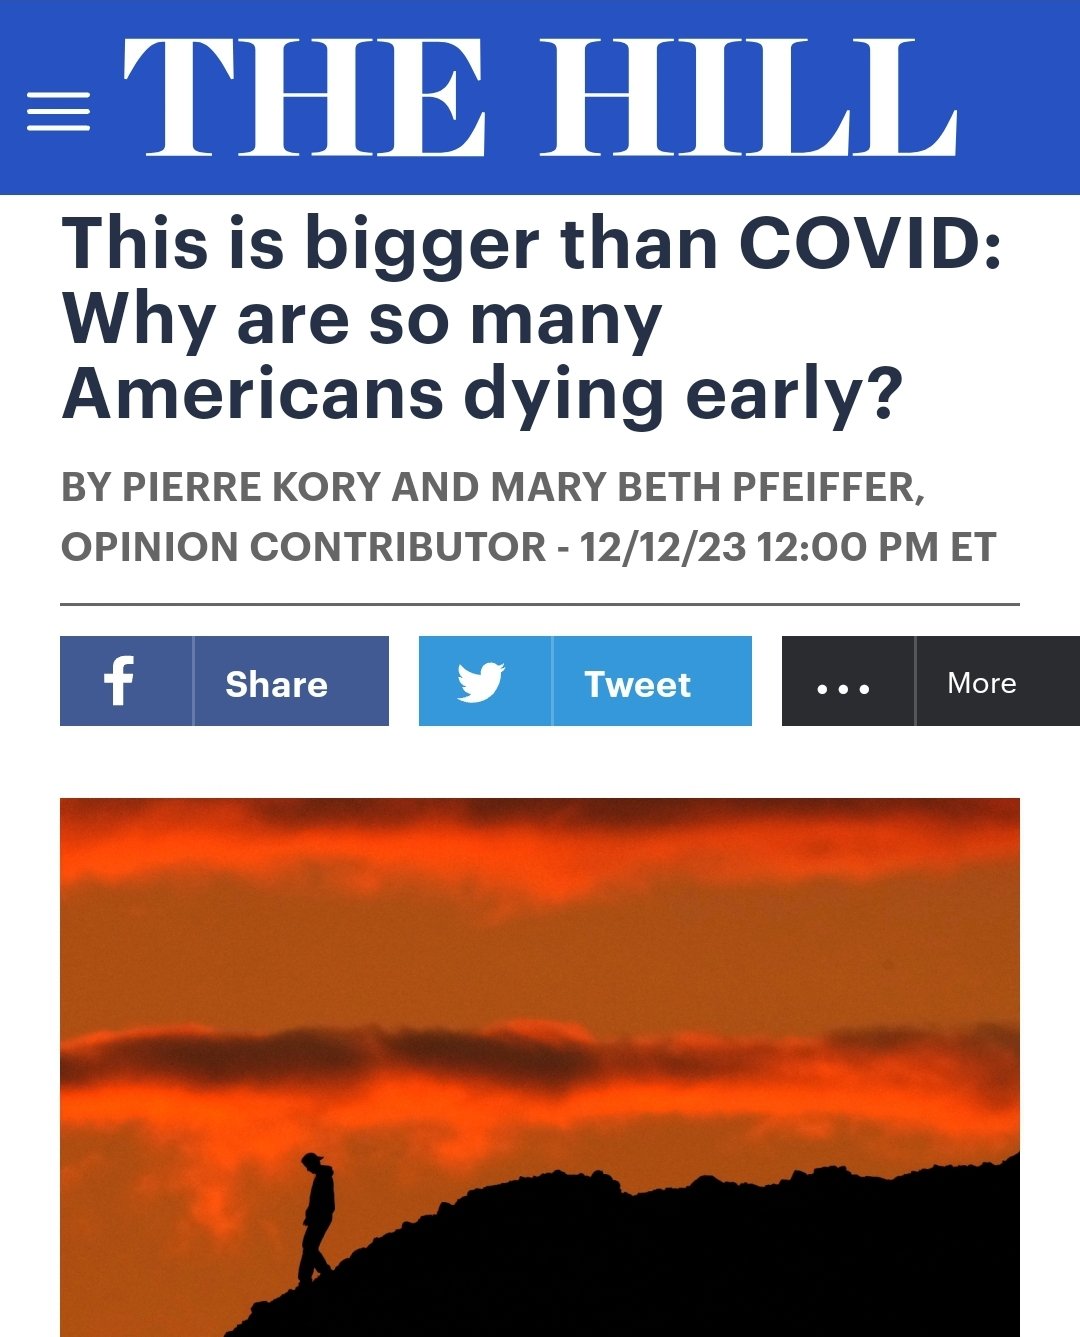 This is bigger than COVID: Why are so many Americans dying early?